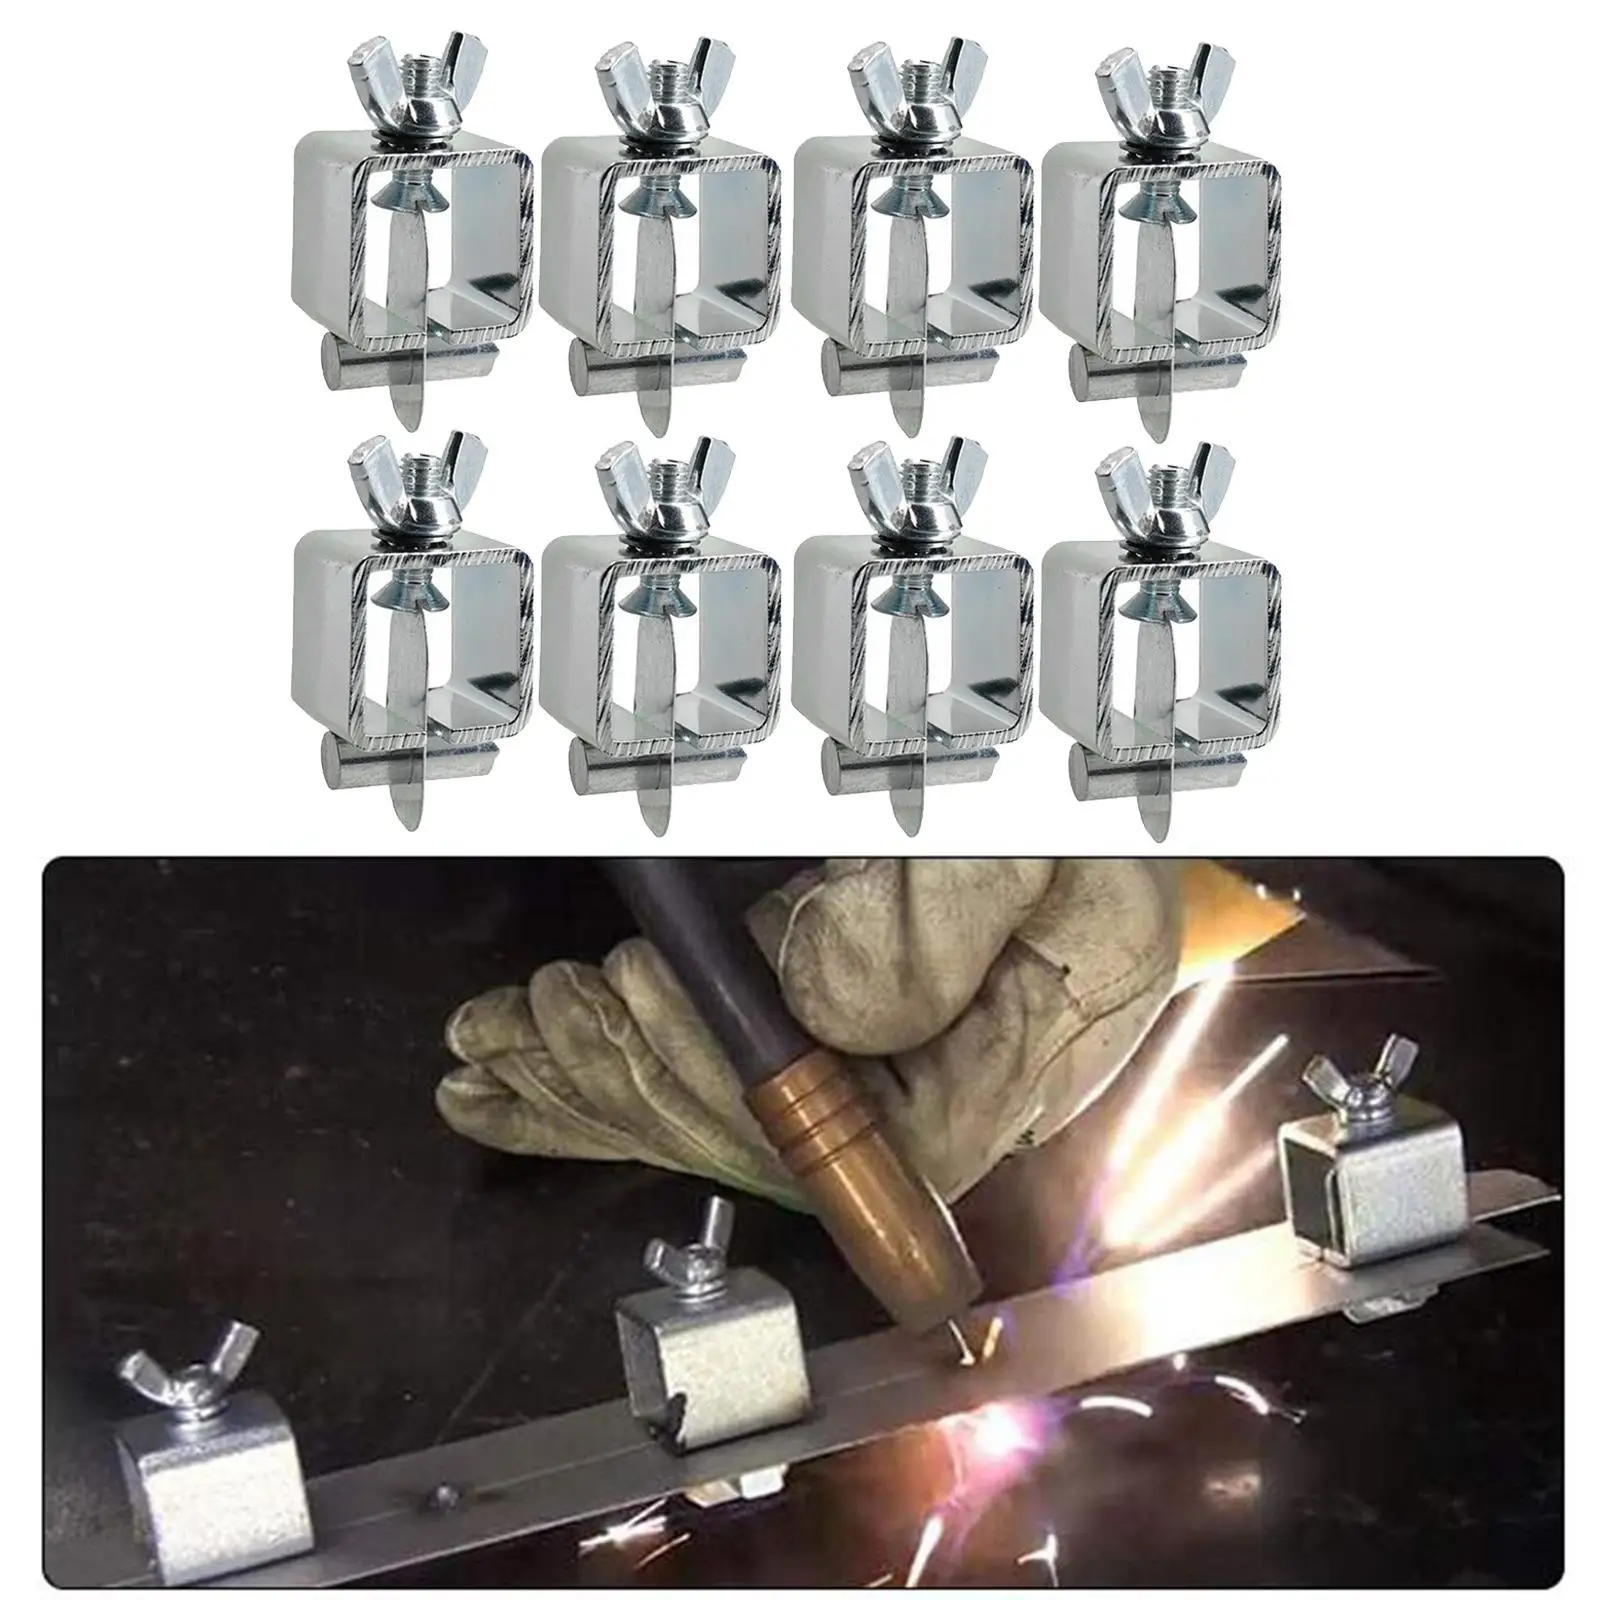 Steel Welding Clamps 8 Pieces Weld Clips for Sheet Metal, Easy to Use and Install, Precision Welding